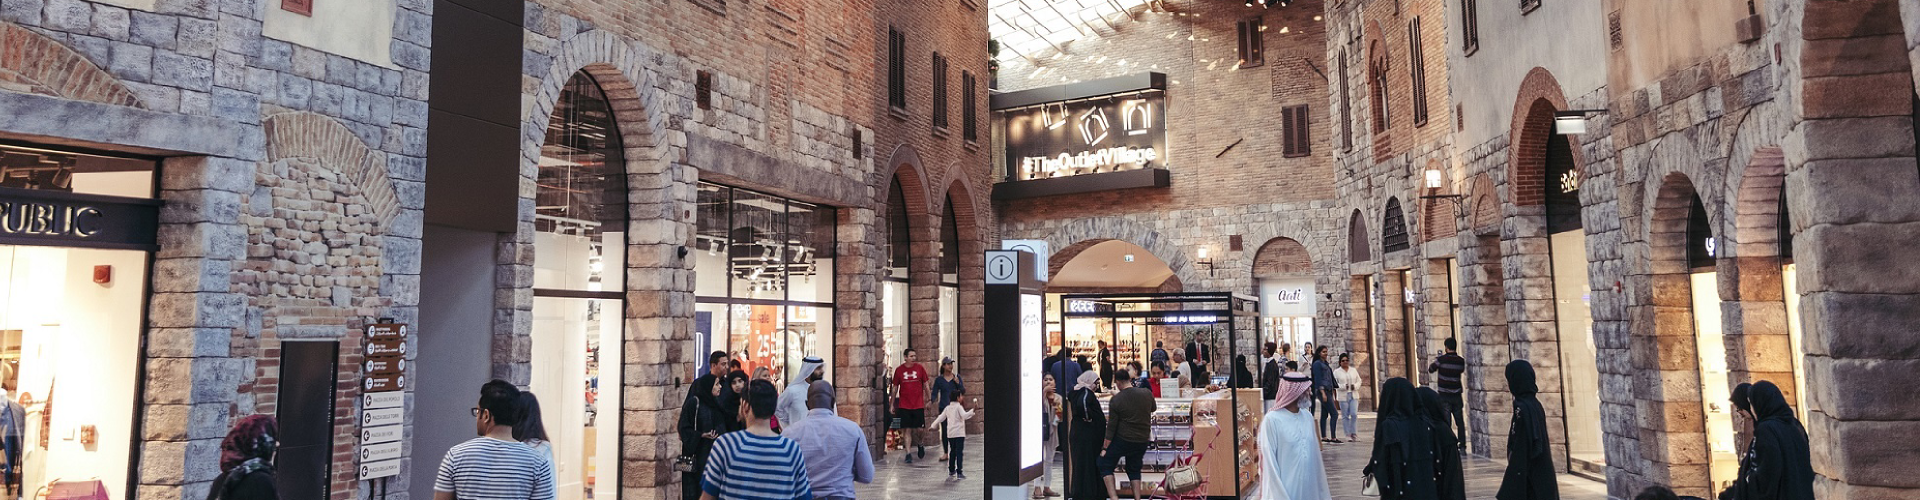 The Outlet Village spoils visitors for choice this DSF